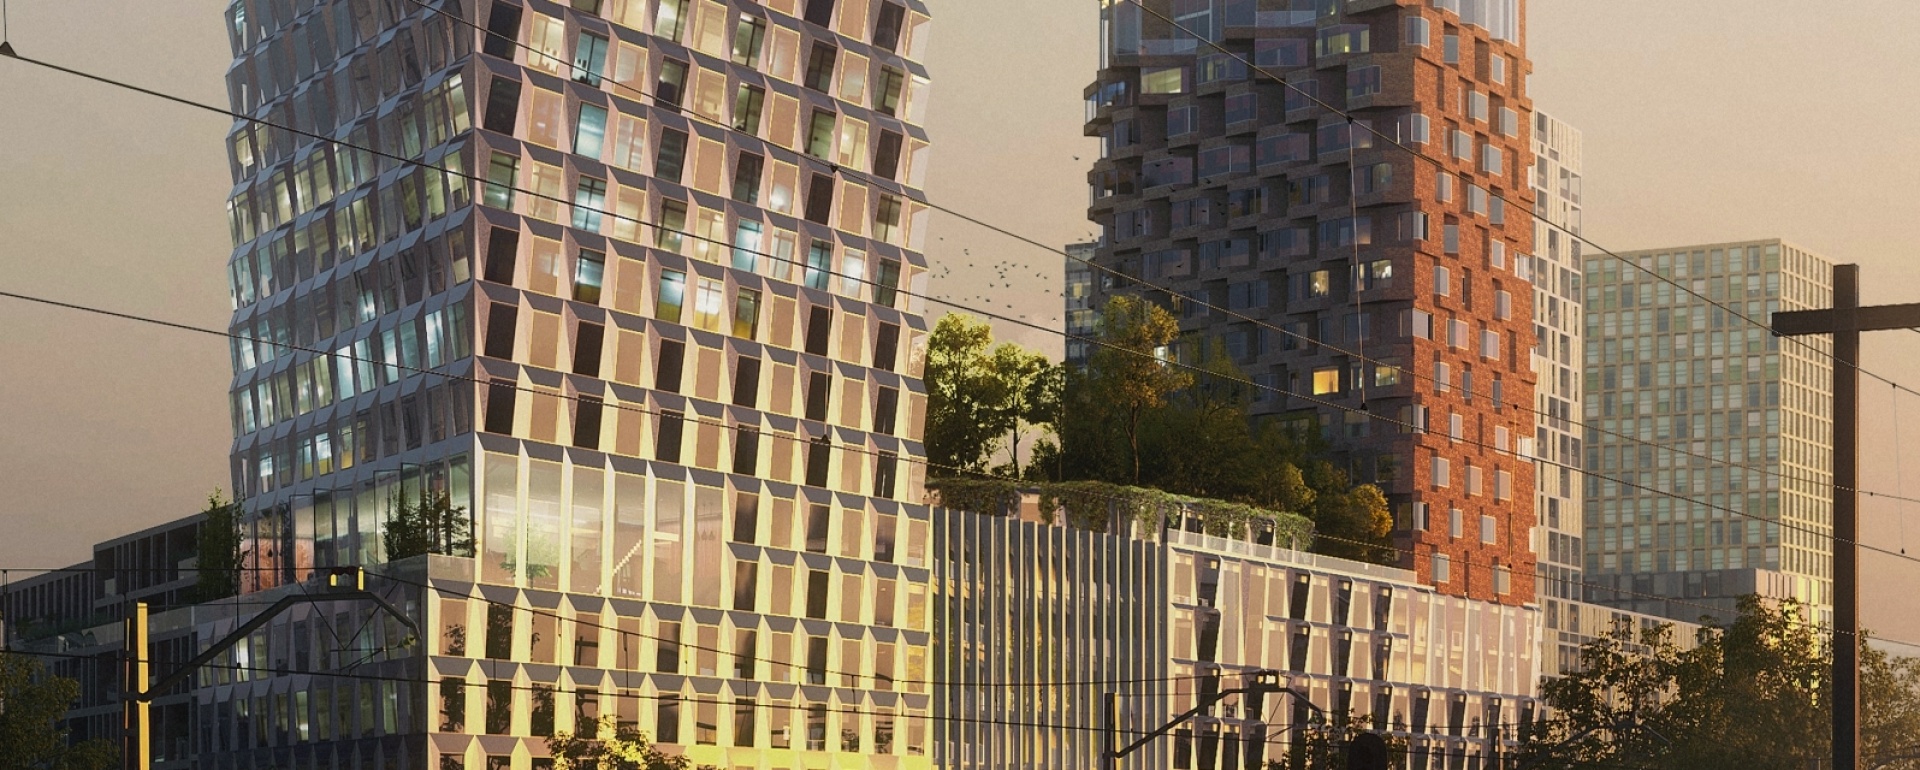 Solico Engineers next-generation sustainable Duplicor composite façade for The Pulse